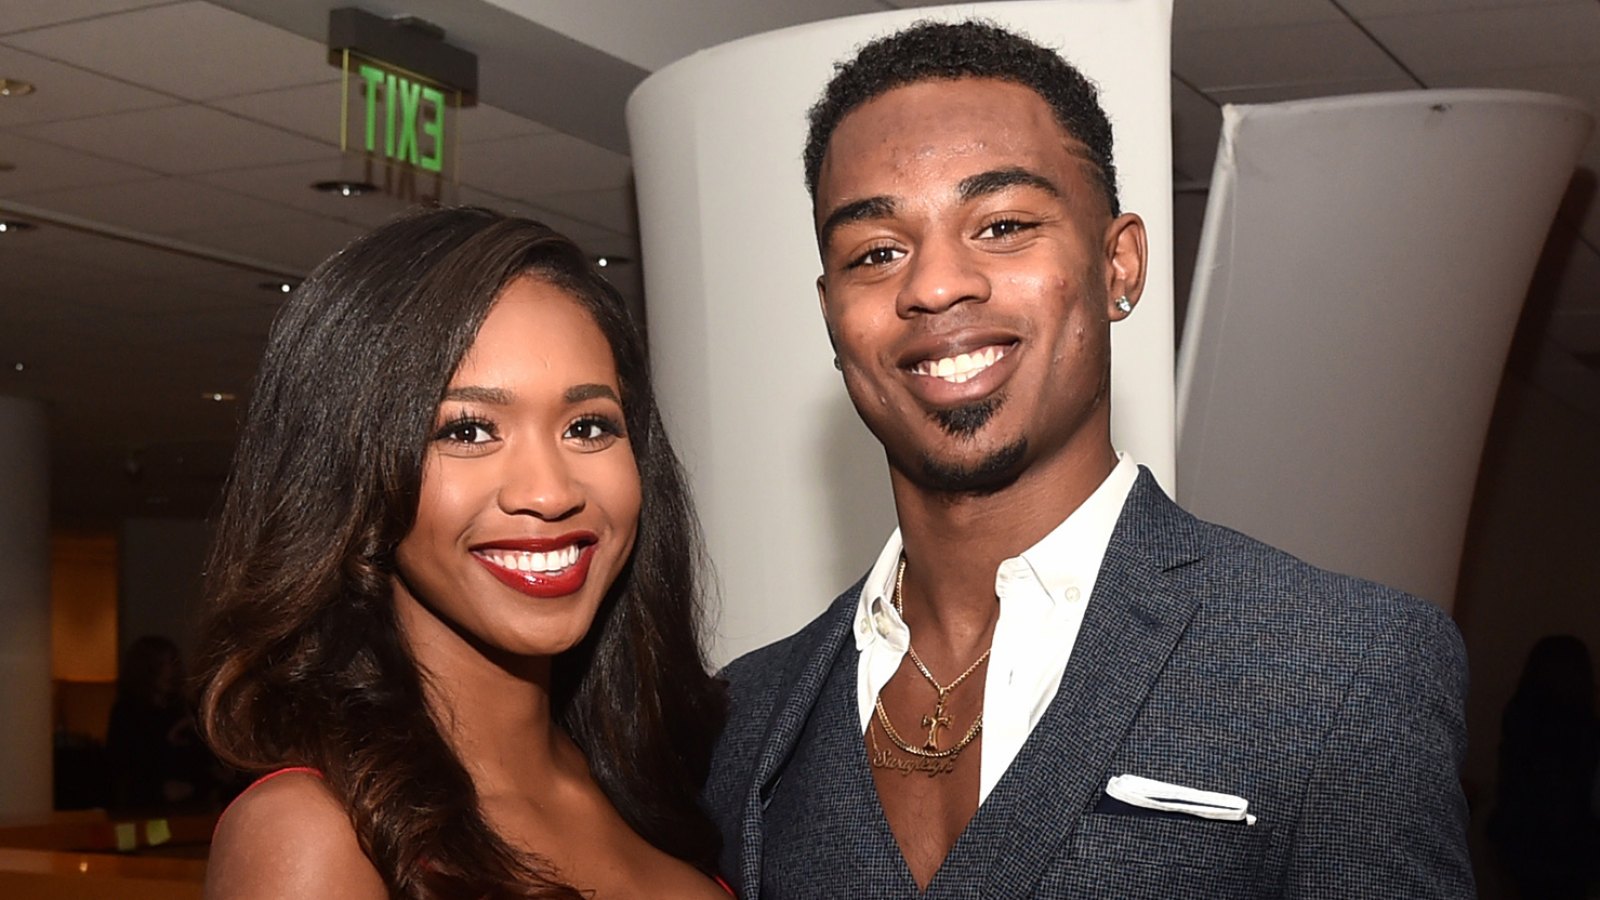 Big Brother’s Bayleigh Dayton Gives Birth to Baby No. 2 With Husband Swaggy C